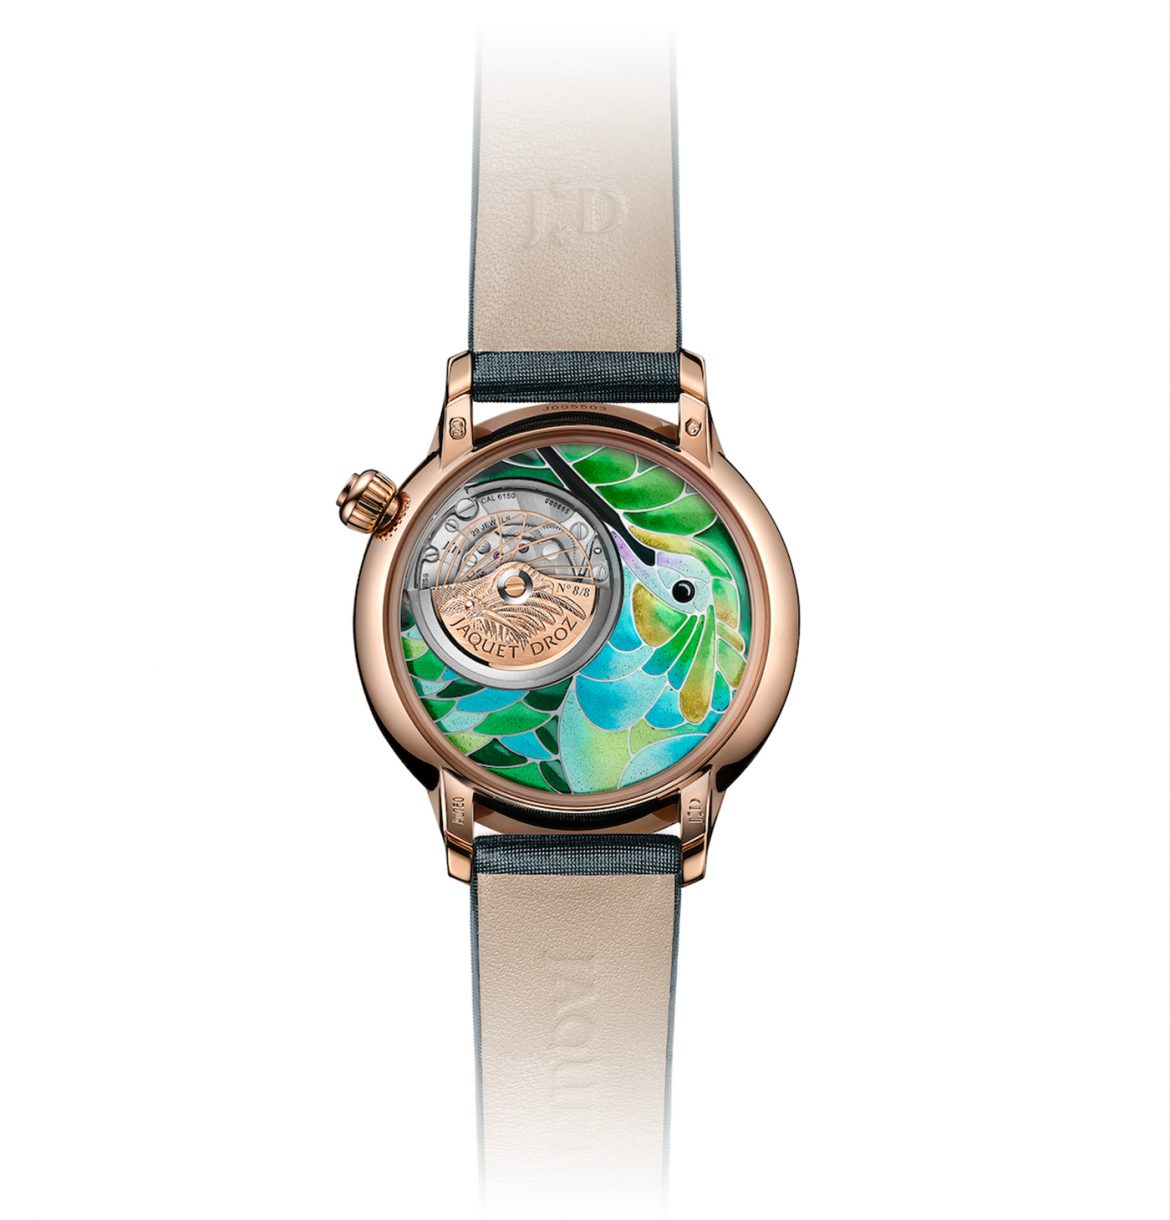 The New Flight Of The Hummingbird By Jaquet Droz 